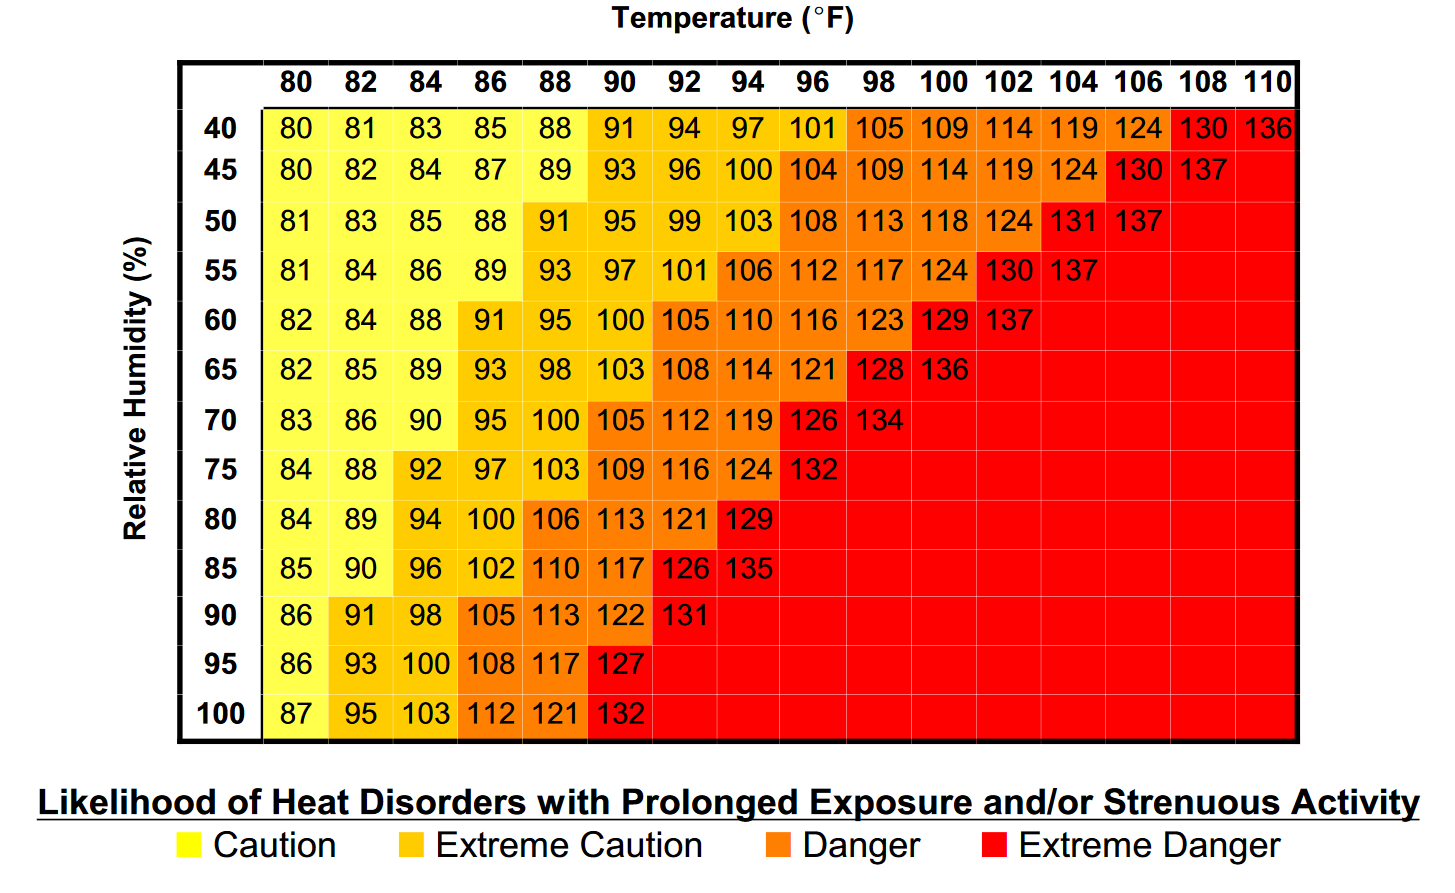 Why Do Heat Index and Wind Chill Temperatures Exist?